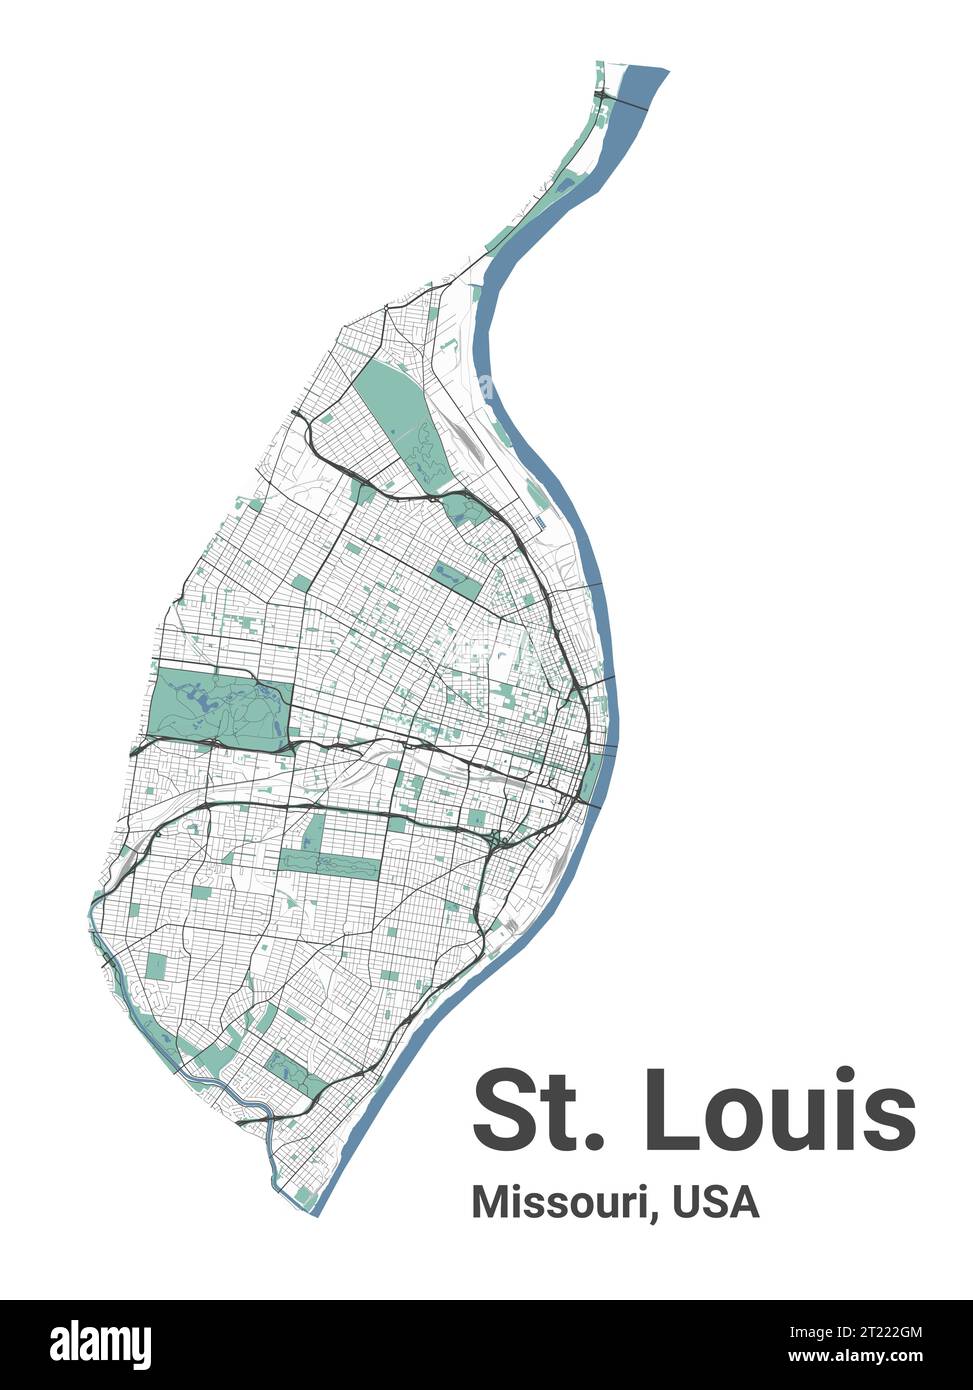 St. Louis map, Missouri, American city. Municipal administrative area map with rivers and roads, parks and railways. Vector illustration. Stock Vector